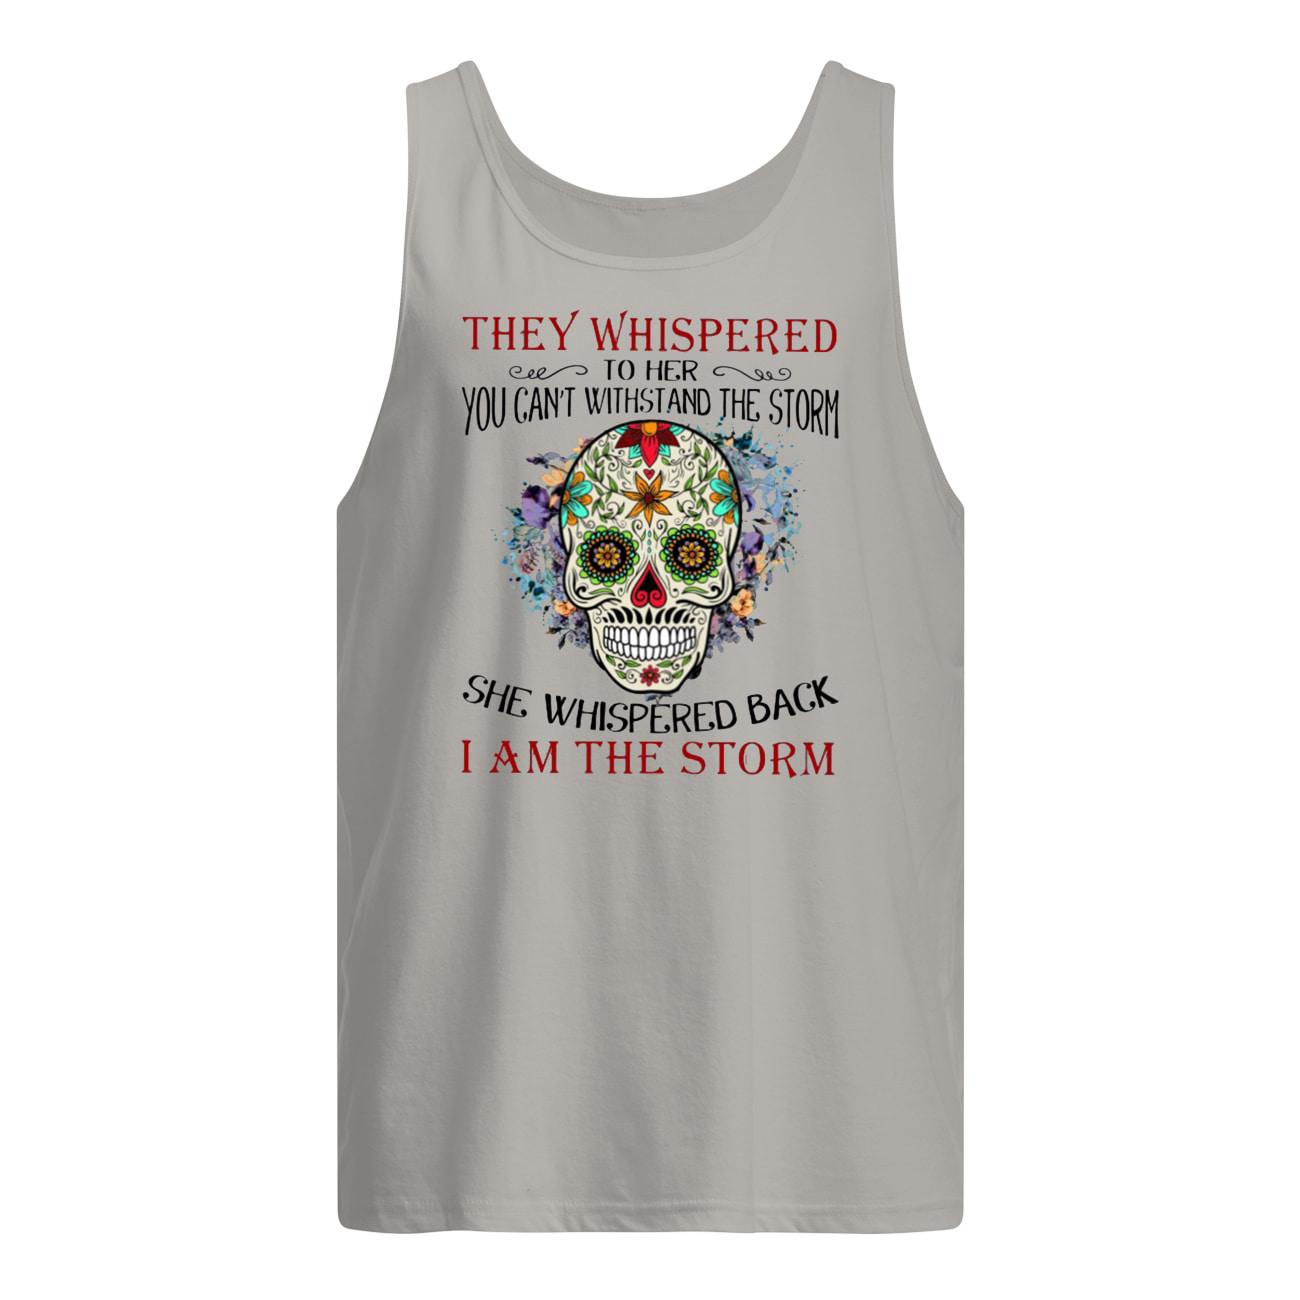 Sugar skull they whispered to her you can't with stand the storm tank top